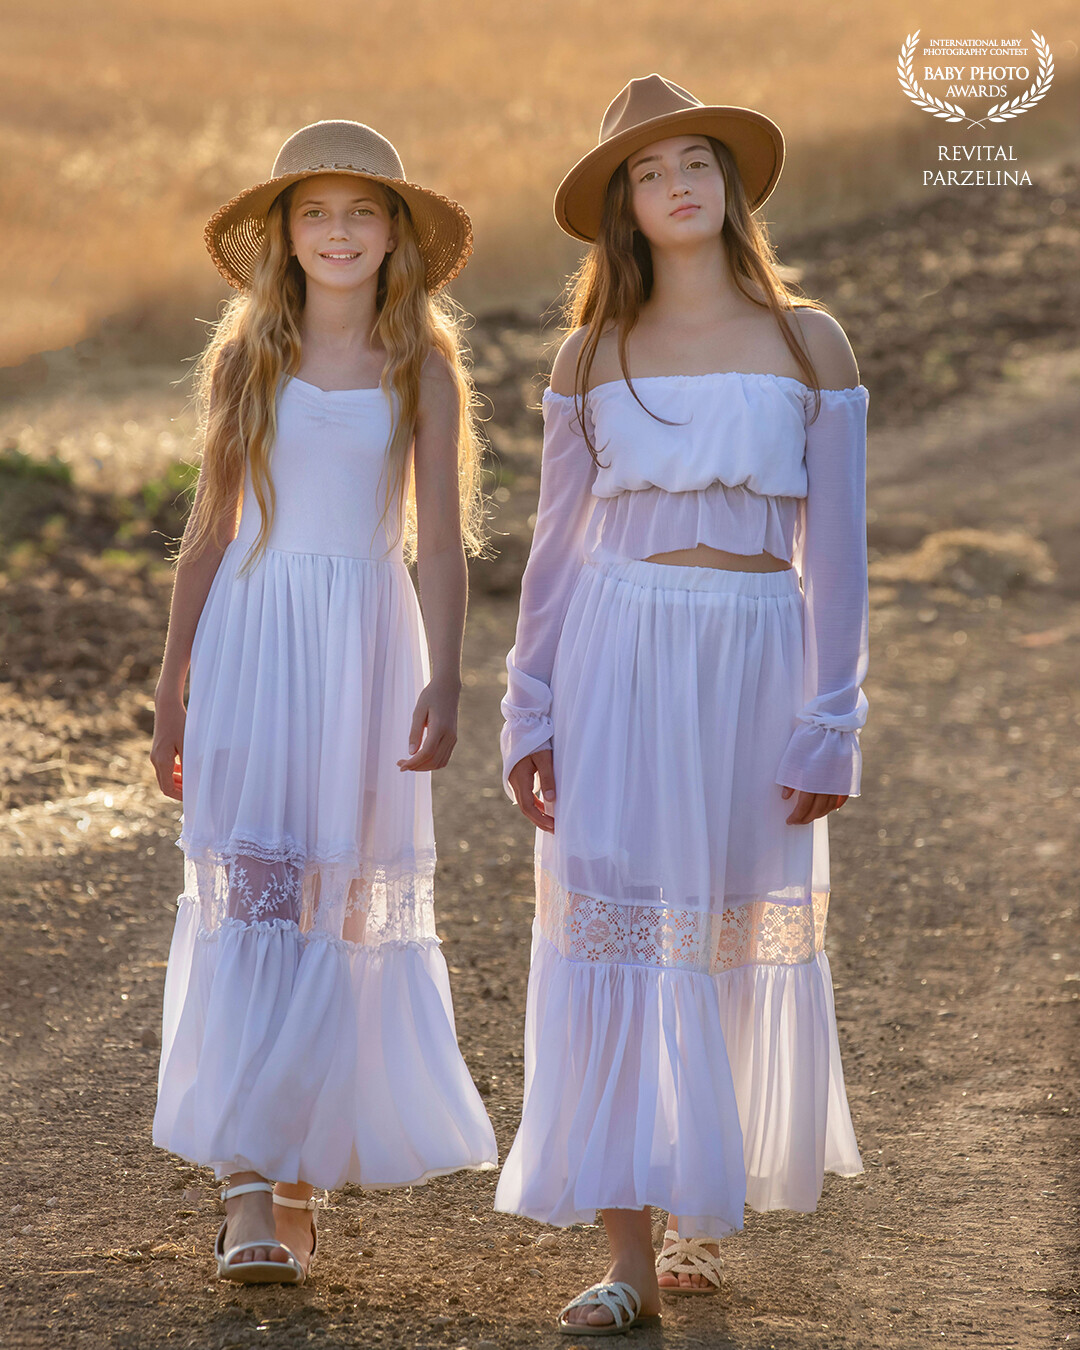 In this beautiful picture we can see a vast golden wheat field stretching endlessly in the background, while two lovely young girls stand in the foreground. Both girls wear a long white dress and a classic wide-brimmed straw hat, which perfectly complement the rural landscape. The sunlight casts a warm, glowing light on their playful faces, and their cheerful expressions radiate pure happiness and contentment. The girls are no doubt enjoying the fresh air and freedom of the open fields in this delightful moment of peace and quiet.